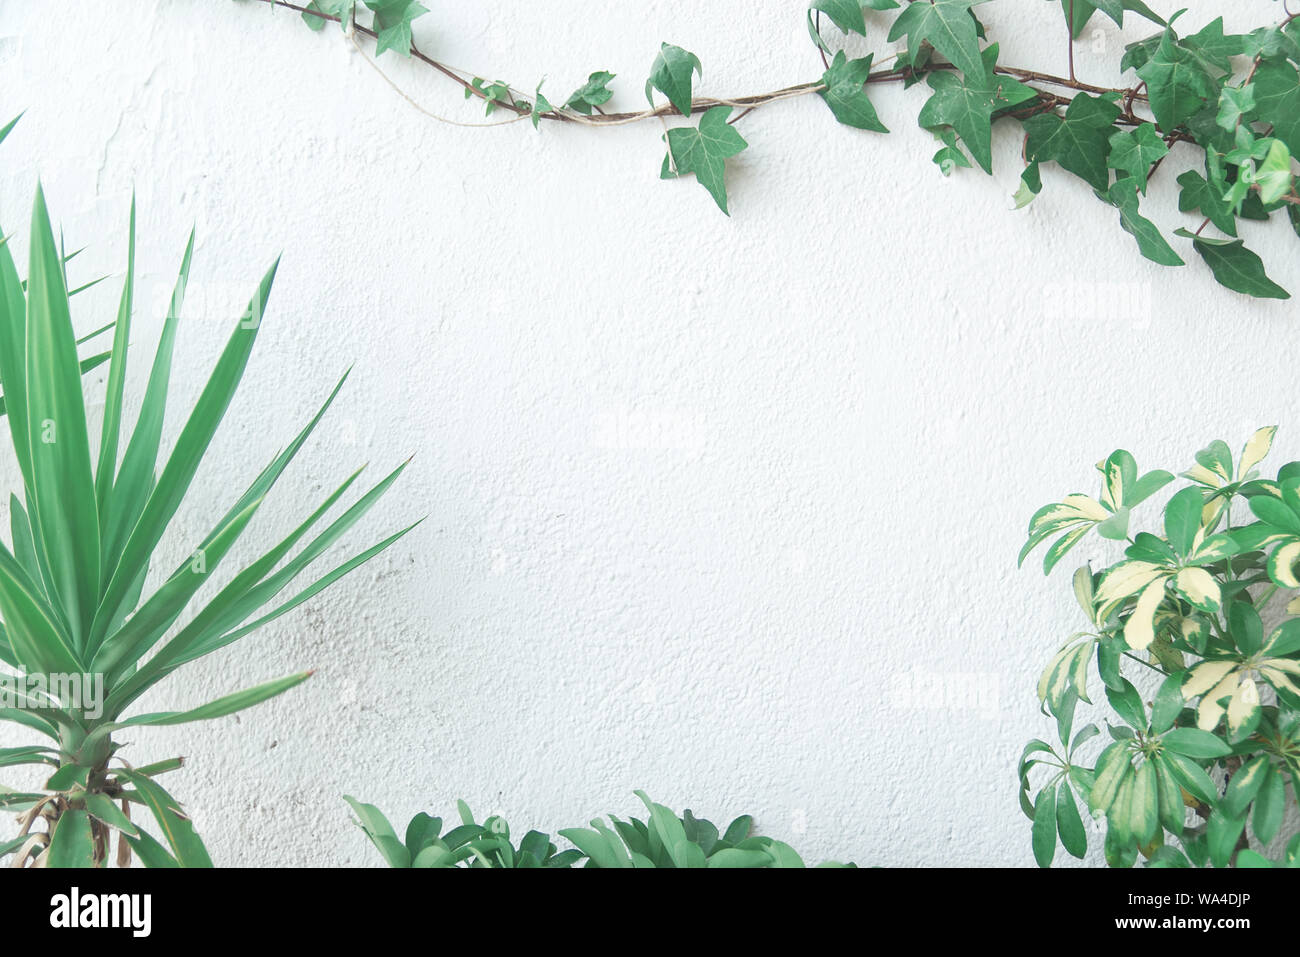 Green foliage with palm, ivy and plants against a white wall background.  Frame composition with empty copy space for Editor's text Stock Photo -  Alamy